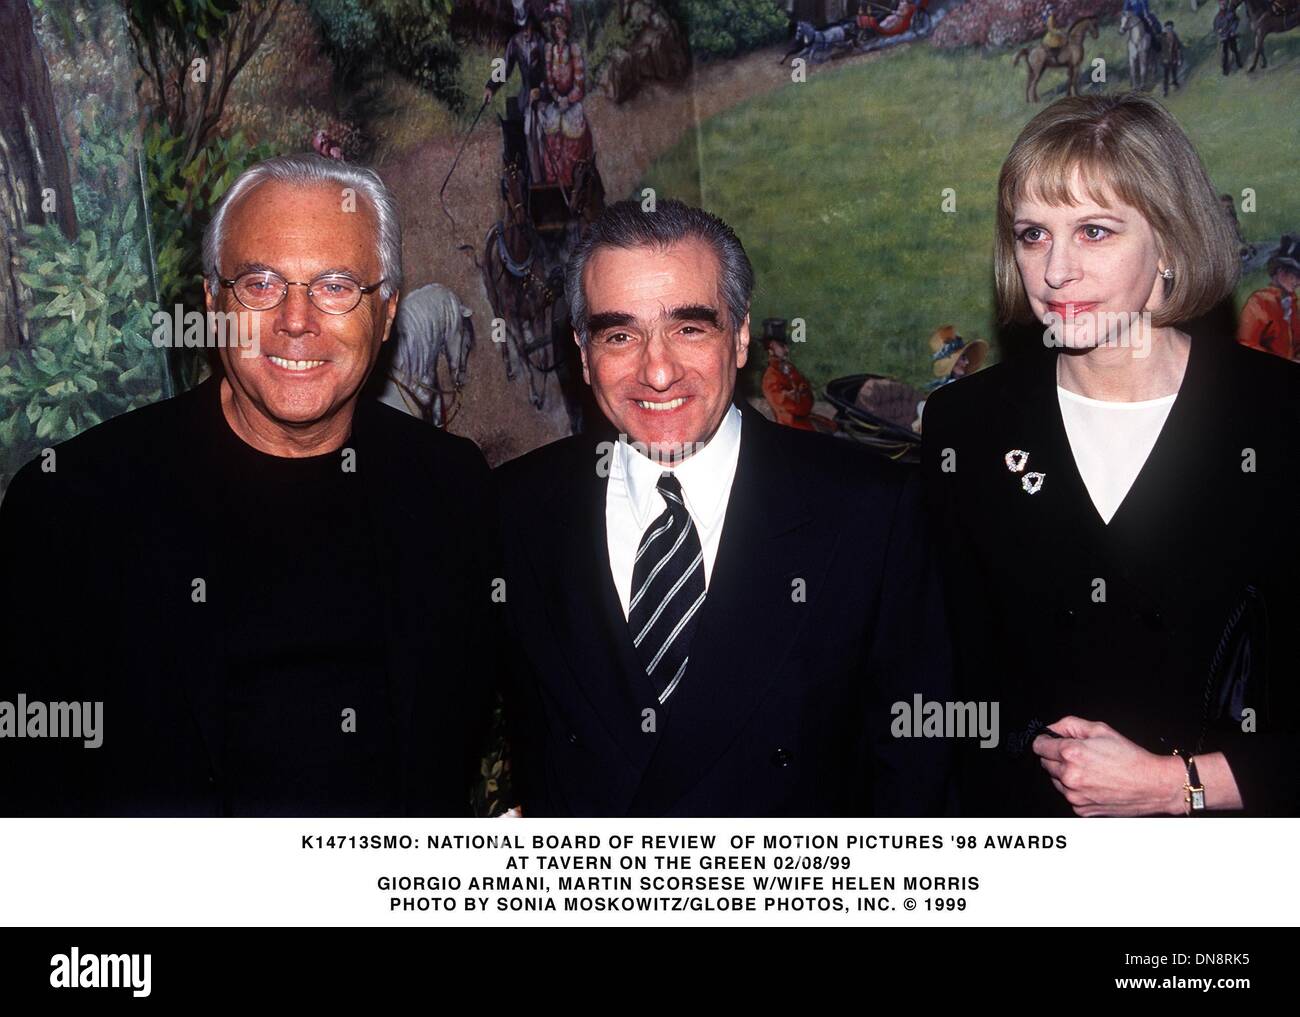 Feb. 8, 1999 - K14713SMO       02/08/99.NATIONAL BOARD OF REVIEW OF MOTION PICTURES '98 AWARDS AT TAVERN ON THE GREEN.GIORGIO ARMANI, MARTIN SCORSESE W/WIFE HELEN MORRIS.. SONIA MOSKOWITZ/   1999(Credit Image: © Globe Photos/ZUMAPRESS.com) Stock Photo